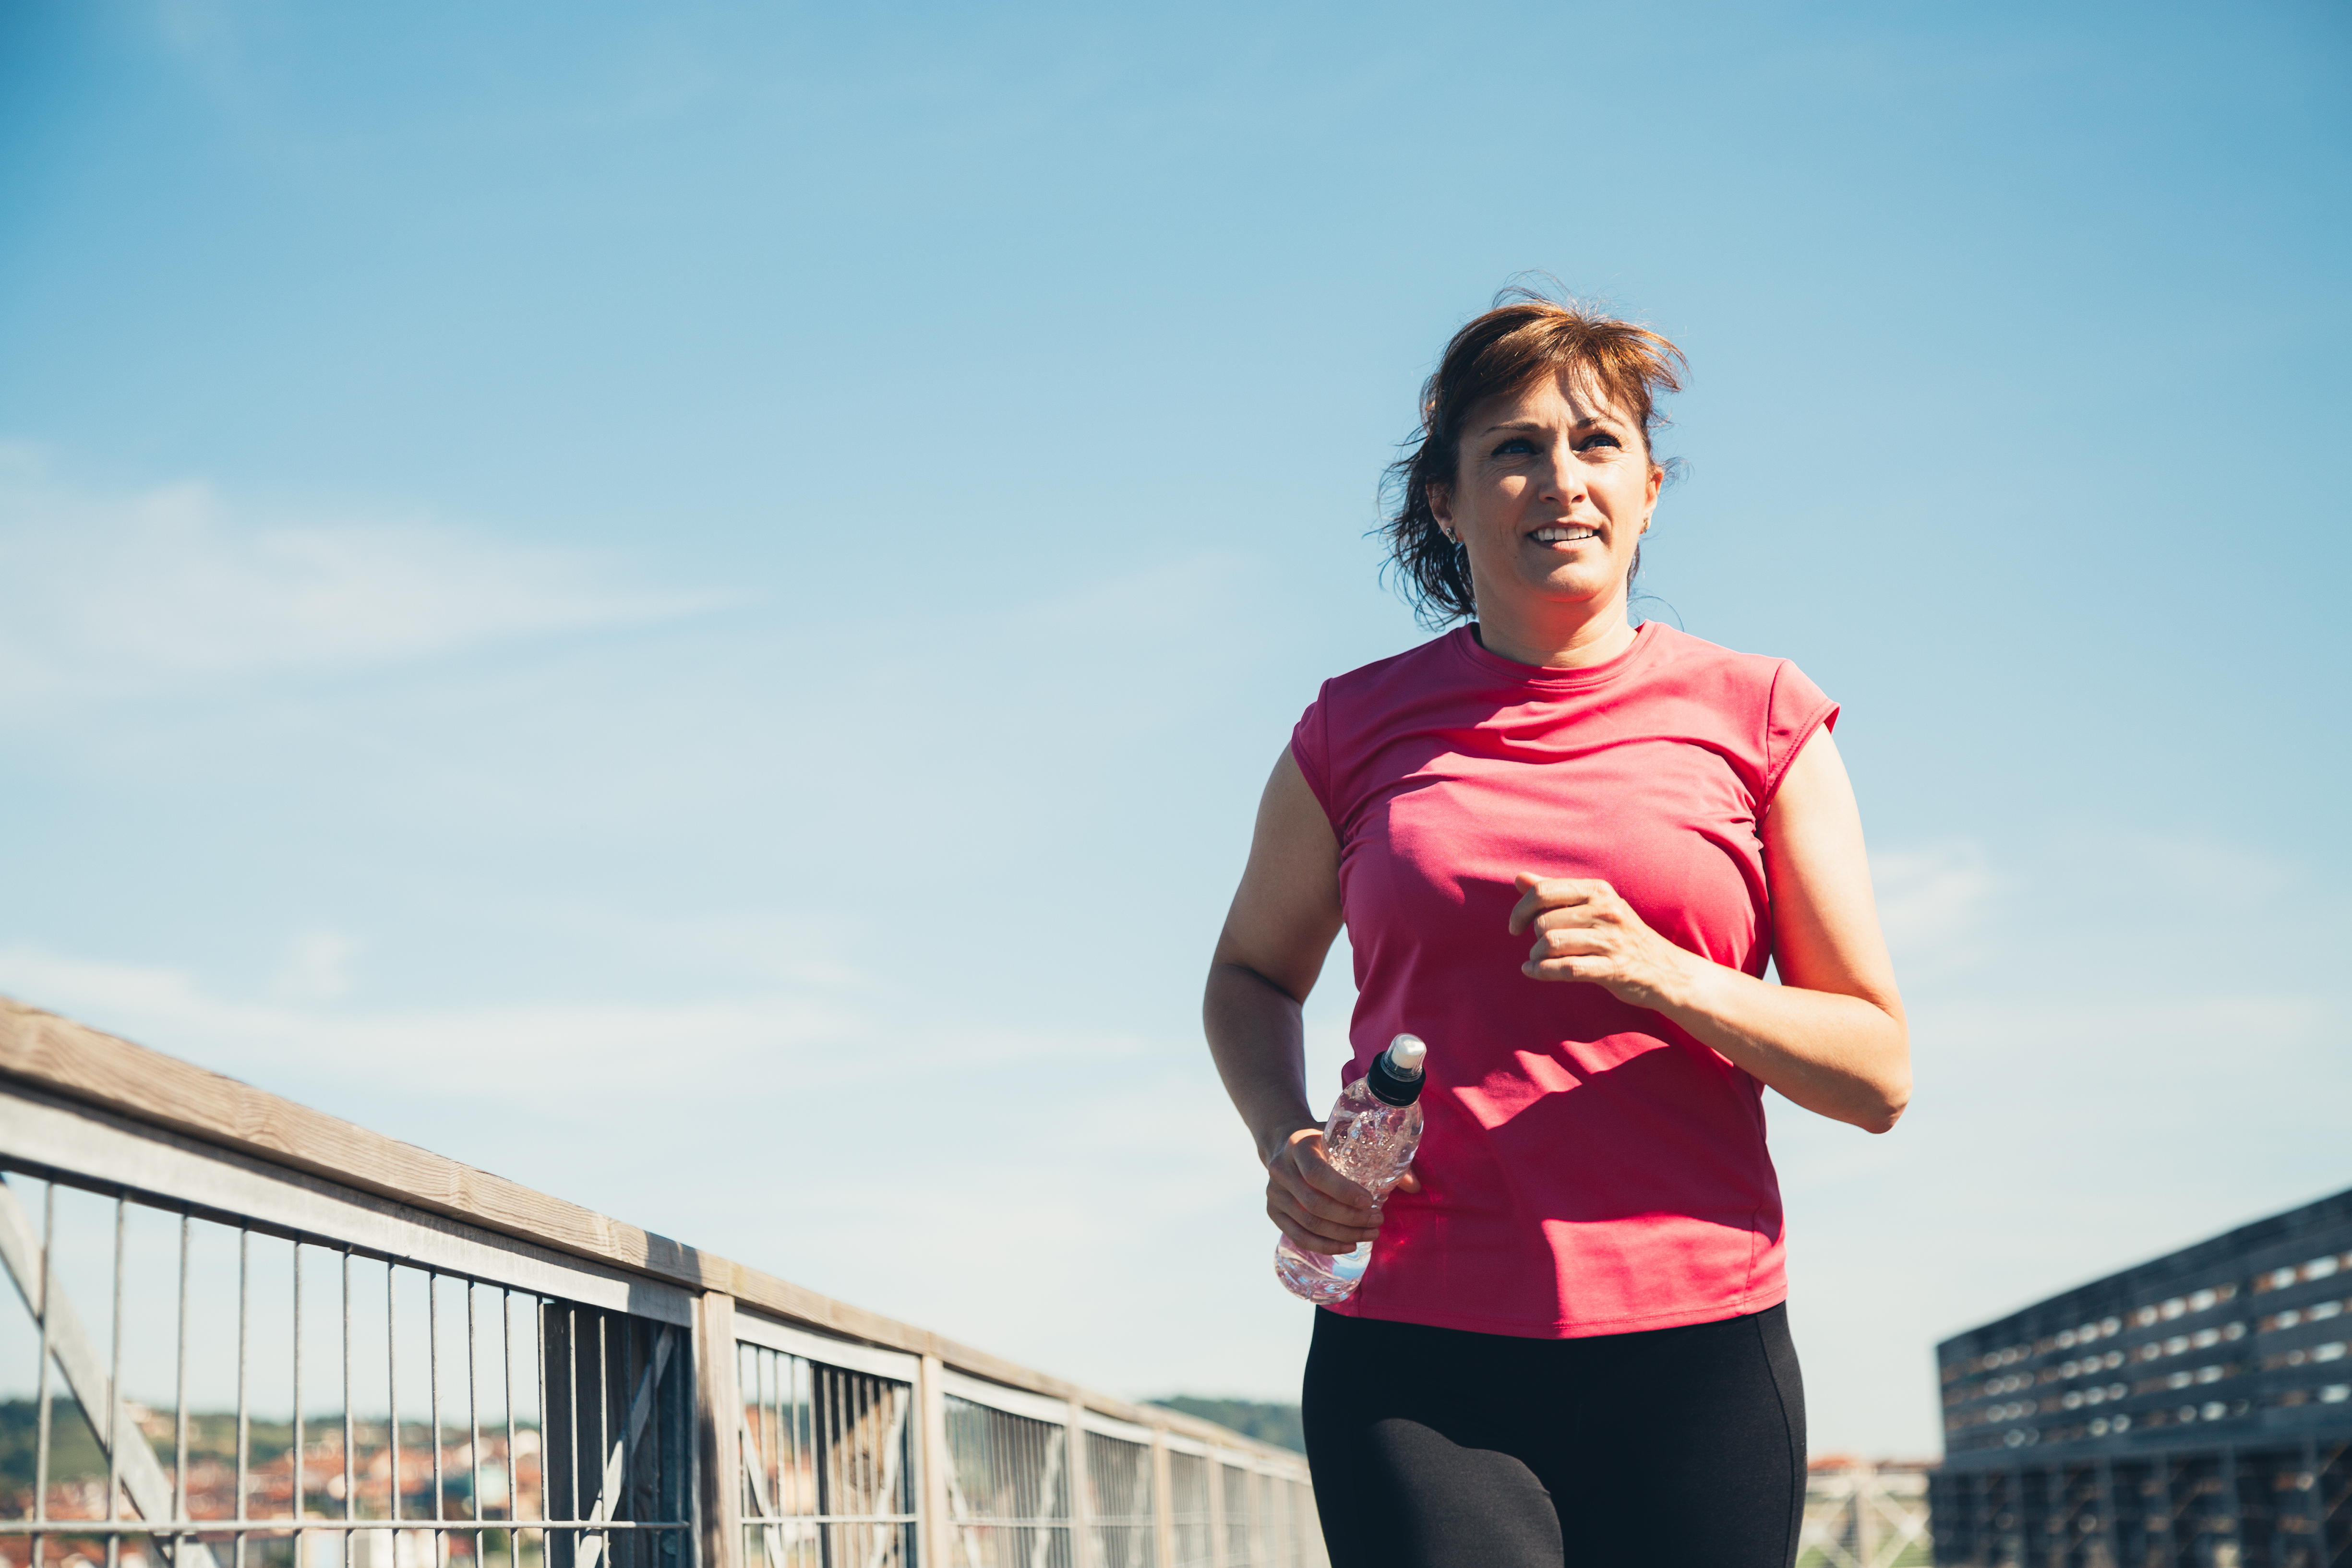 Middle aged woman running with water bottle